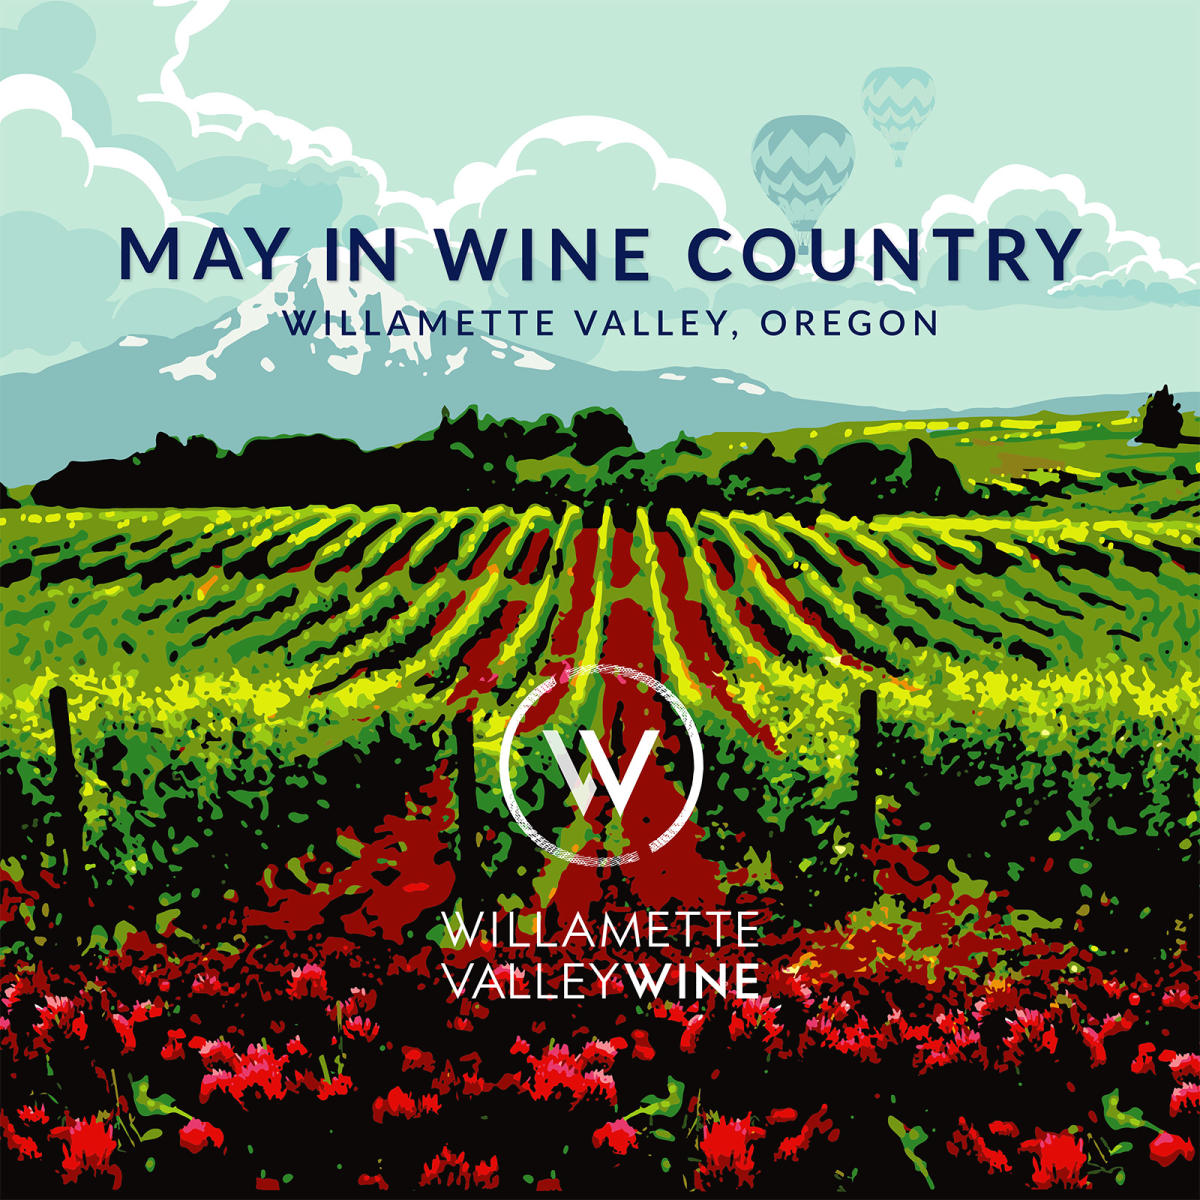 Celebrate May in wine country!